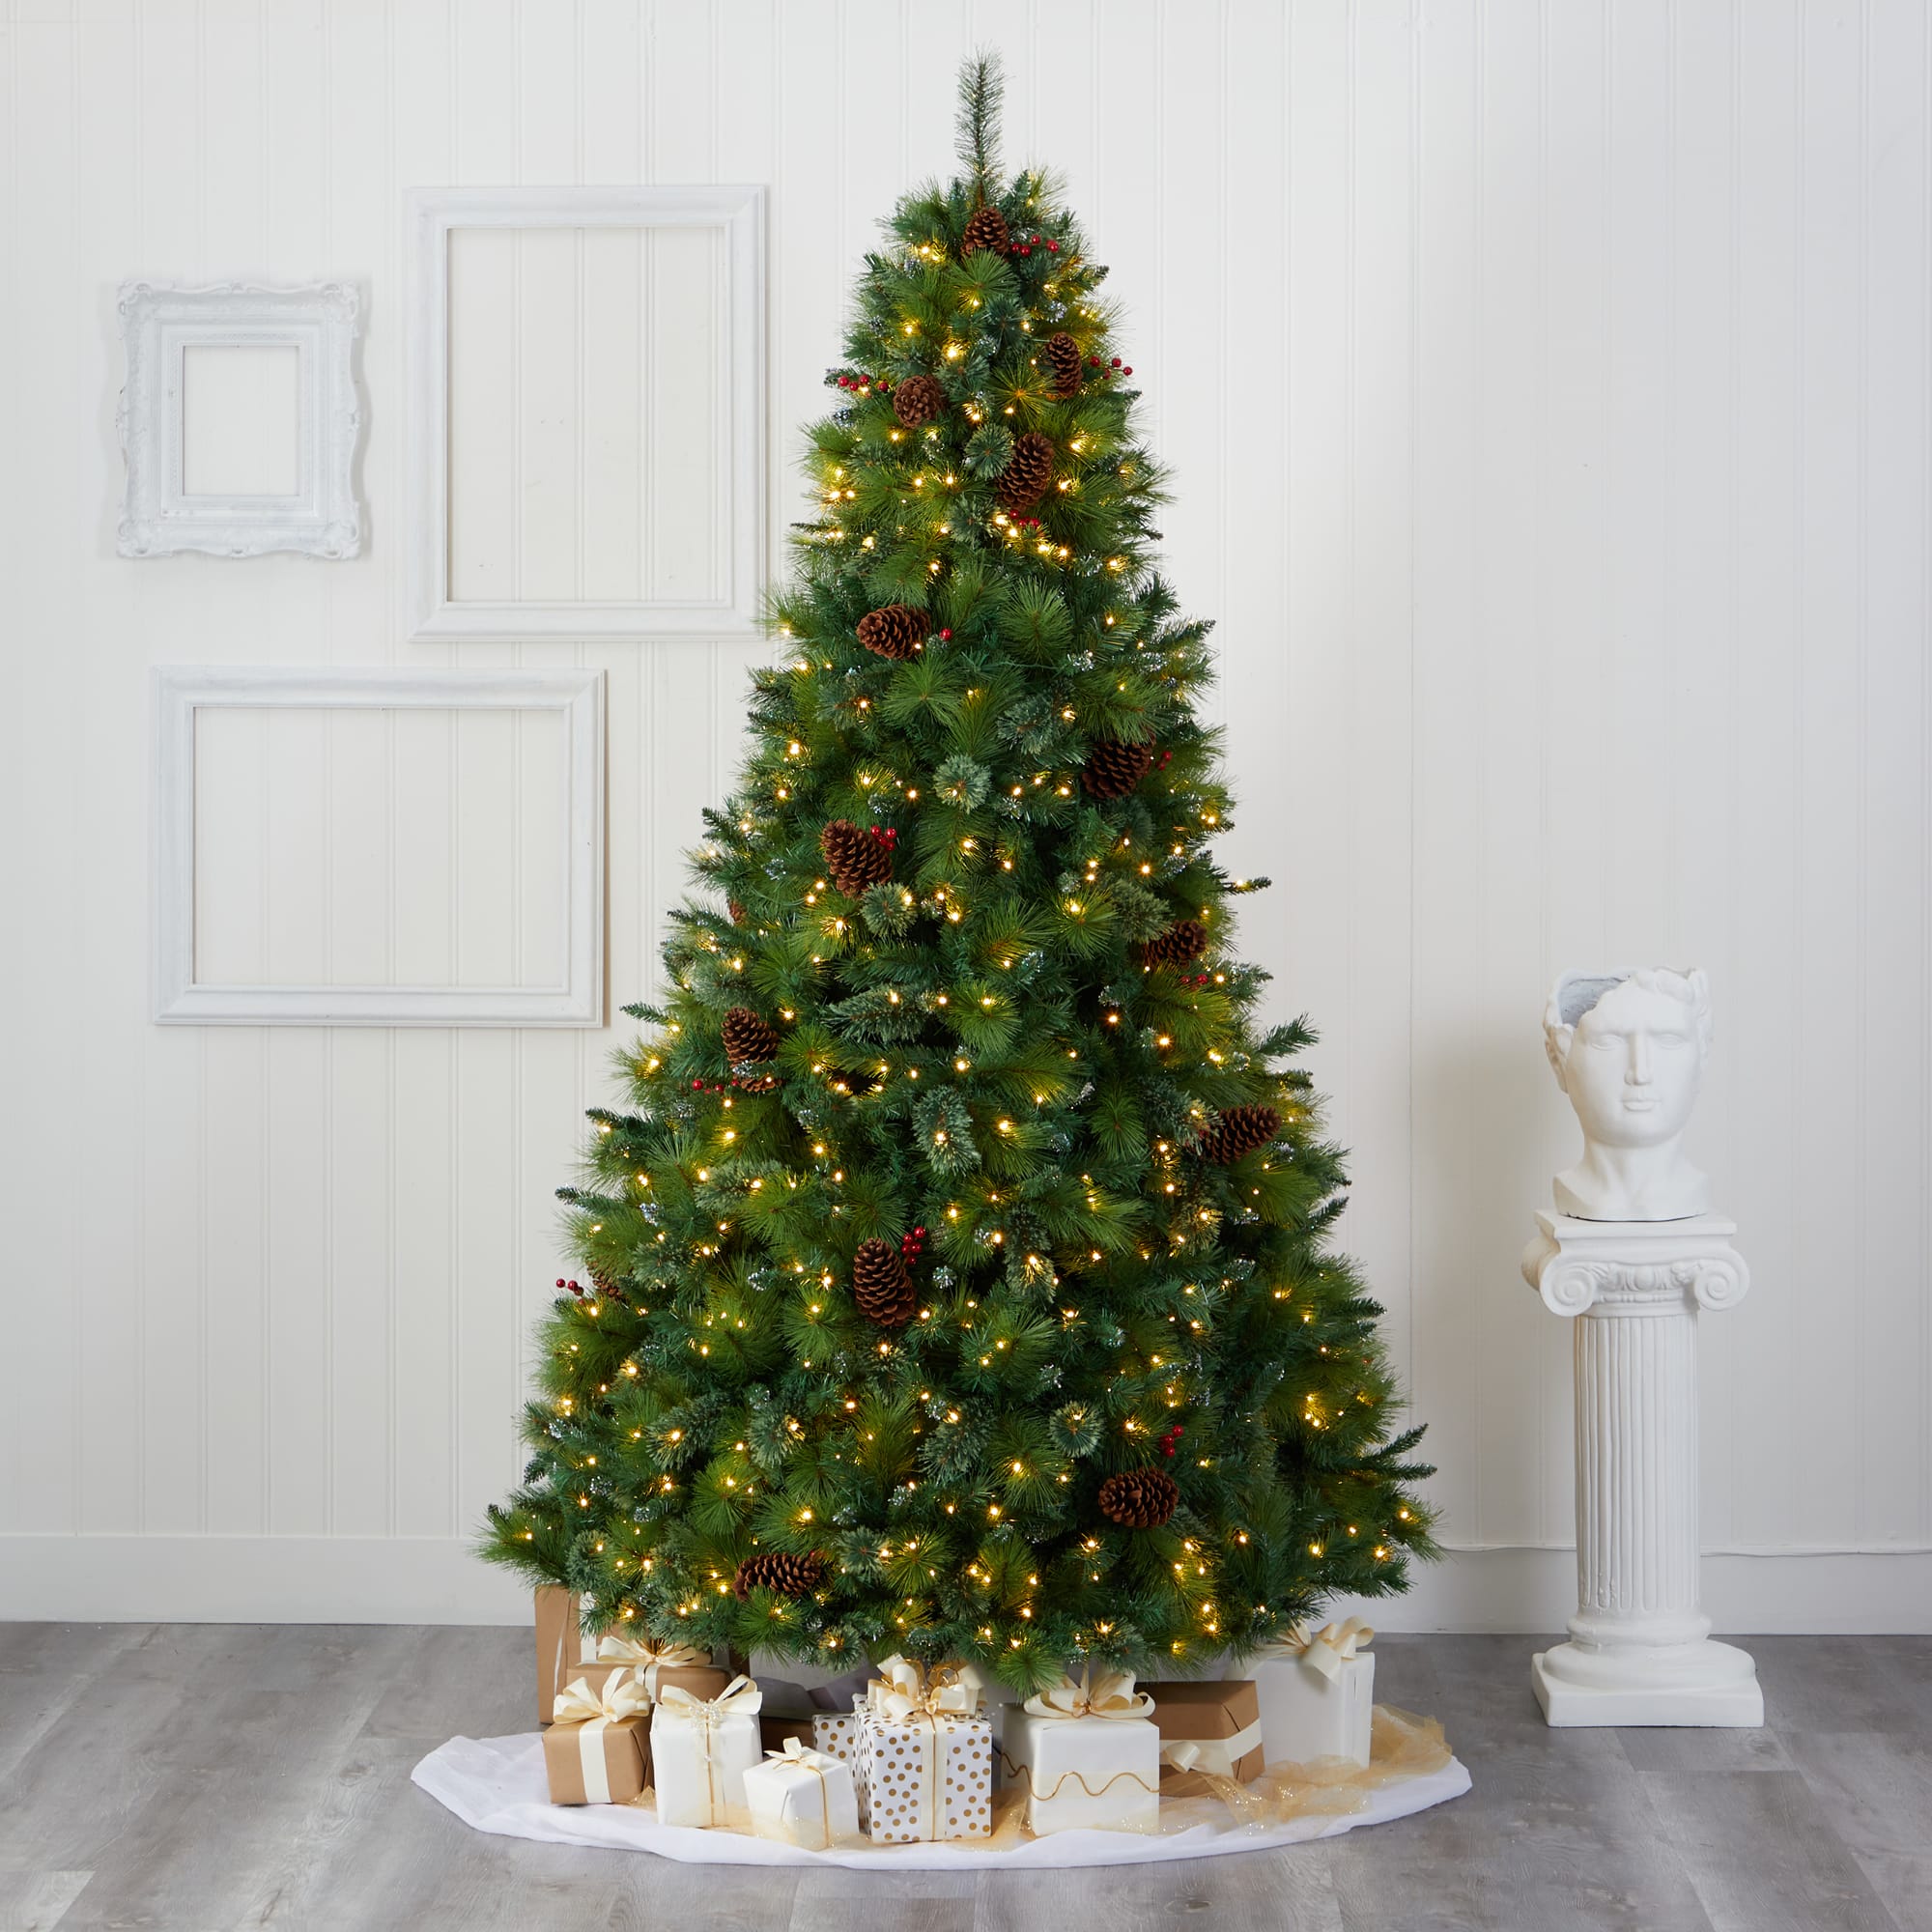 Details about   8ft Pre Decorated Artificial Christmas Tree With Berries & Pine Cone Home Decor 